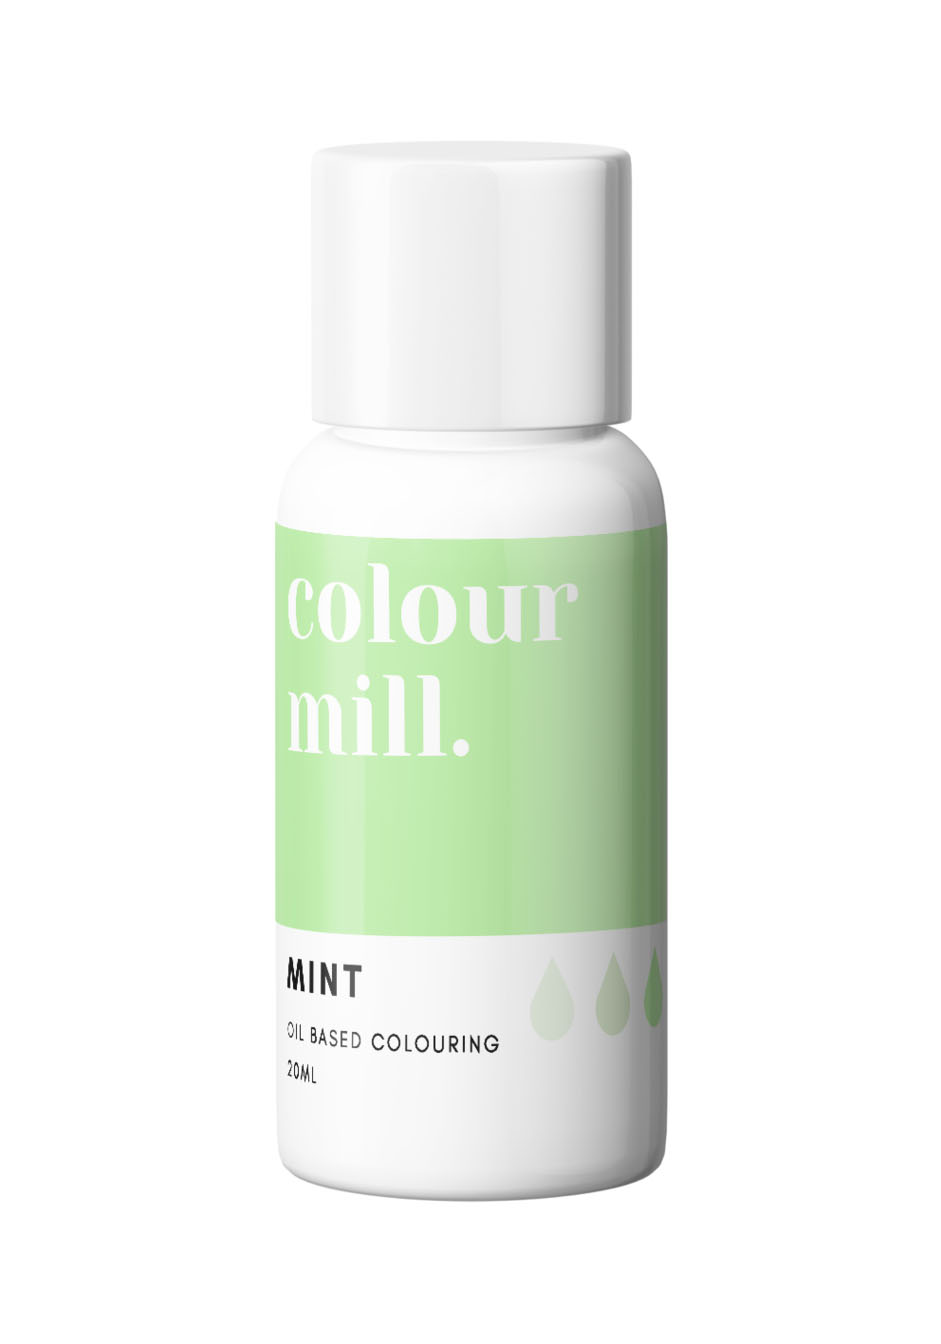 Colour Mill Mint Colouring 20ml